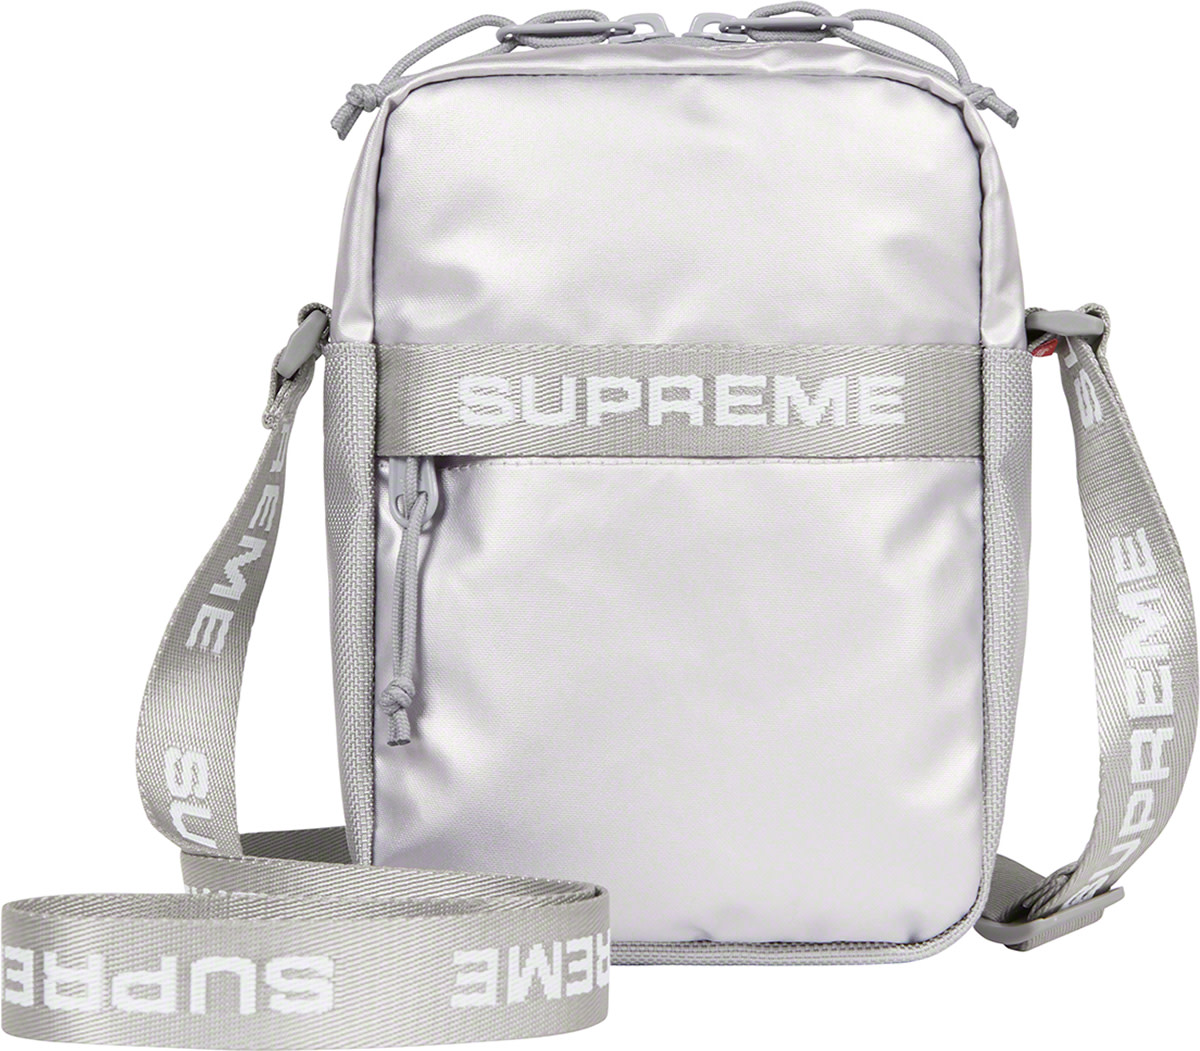 New #supreme shoulder bags available in store! Come “Shop & get